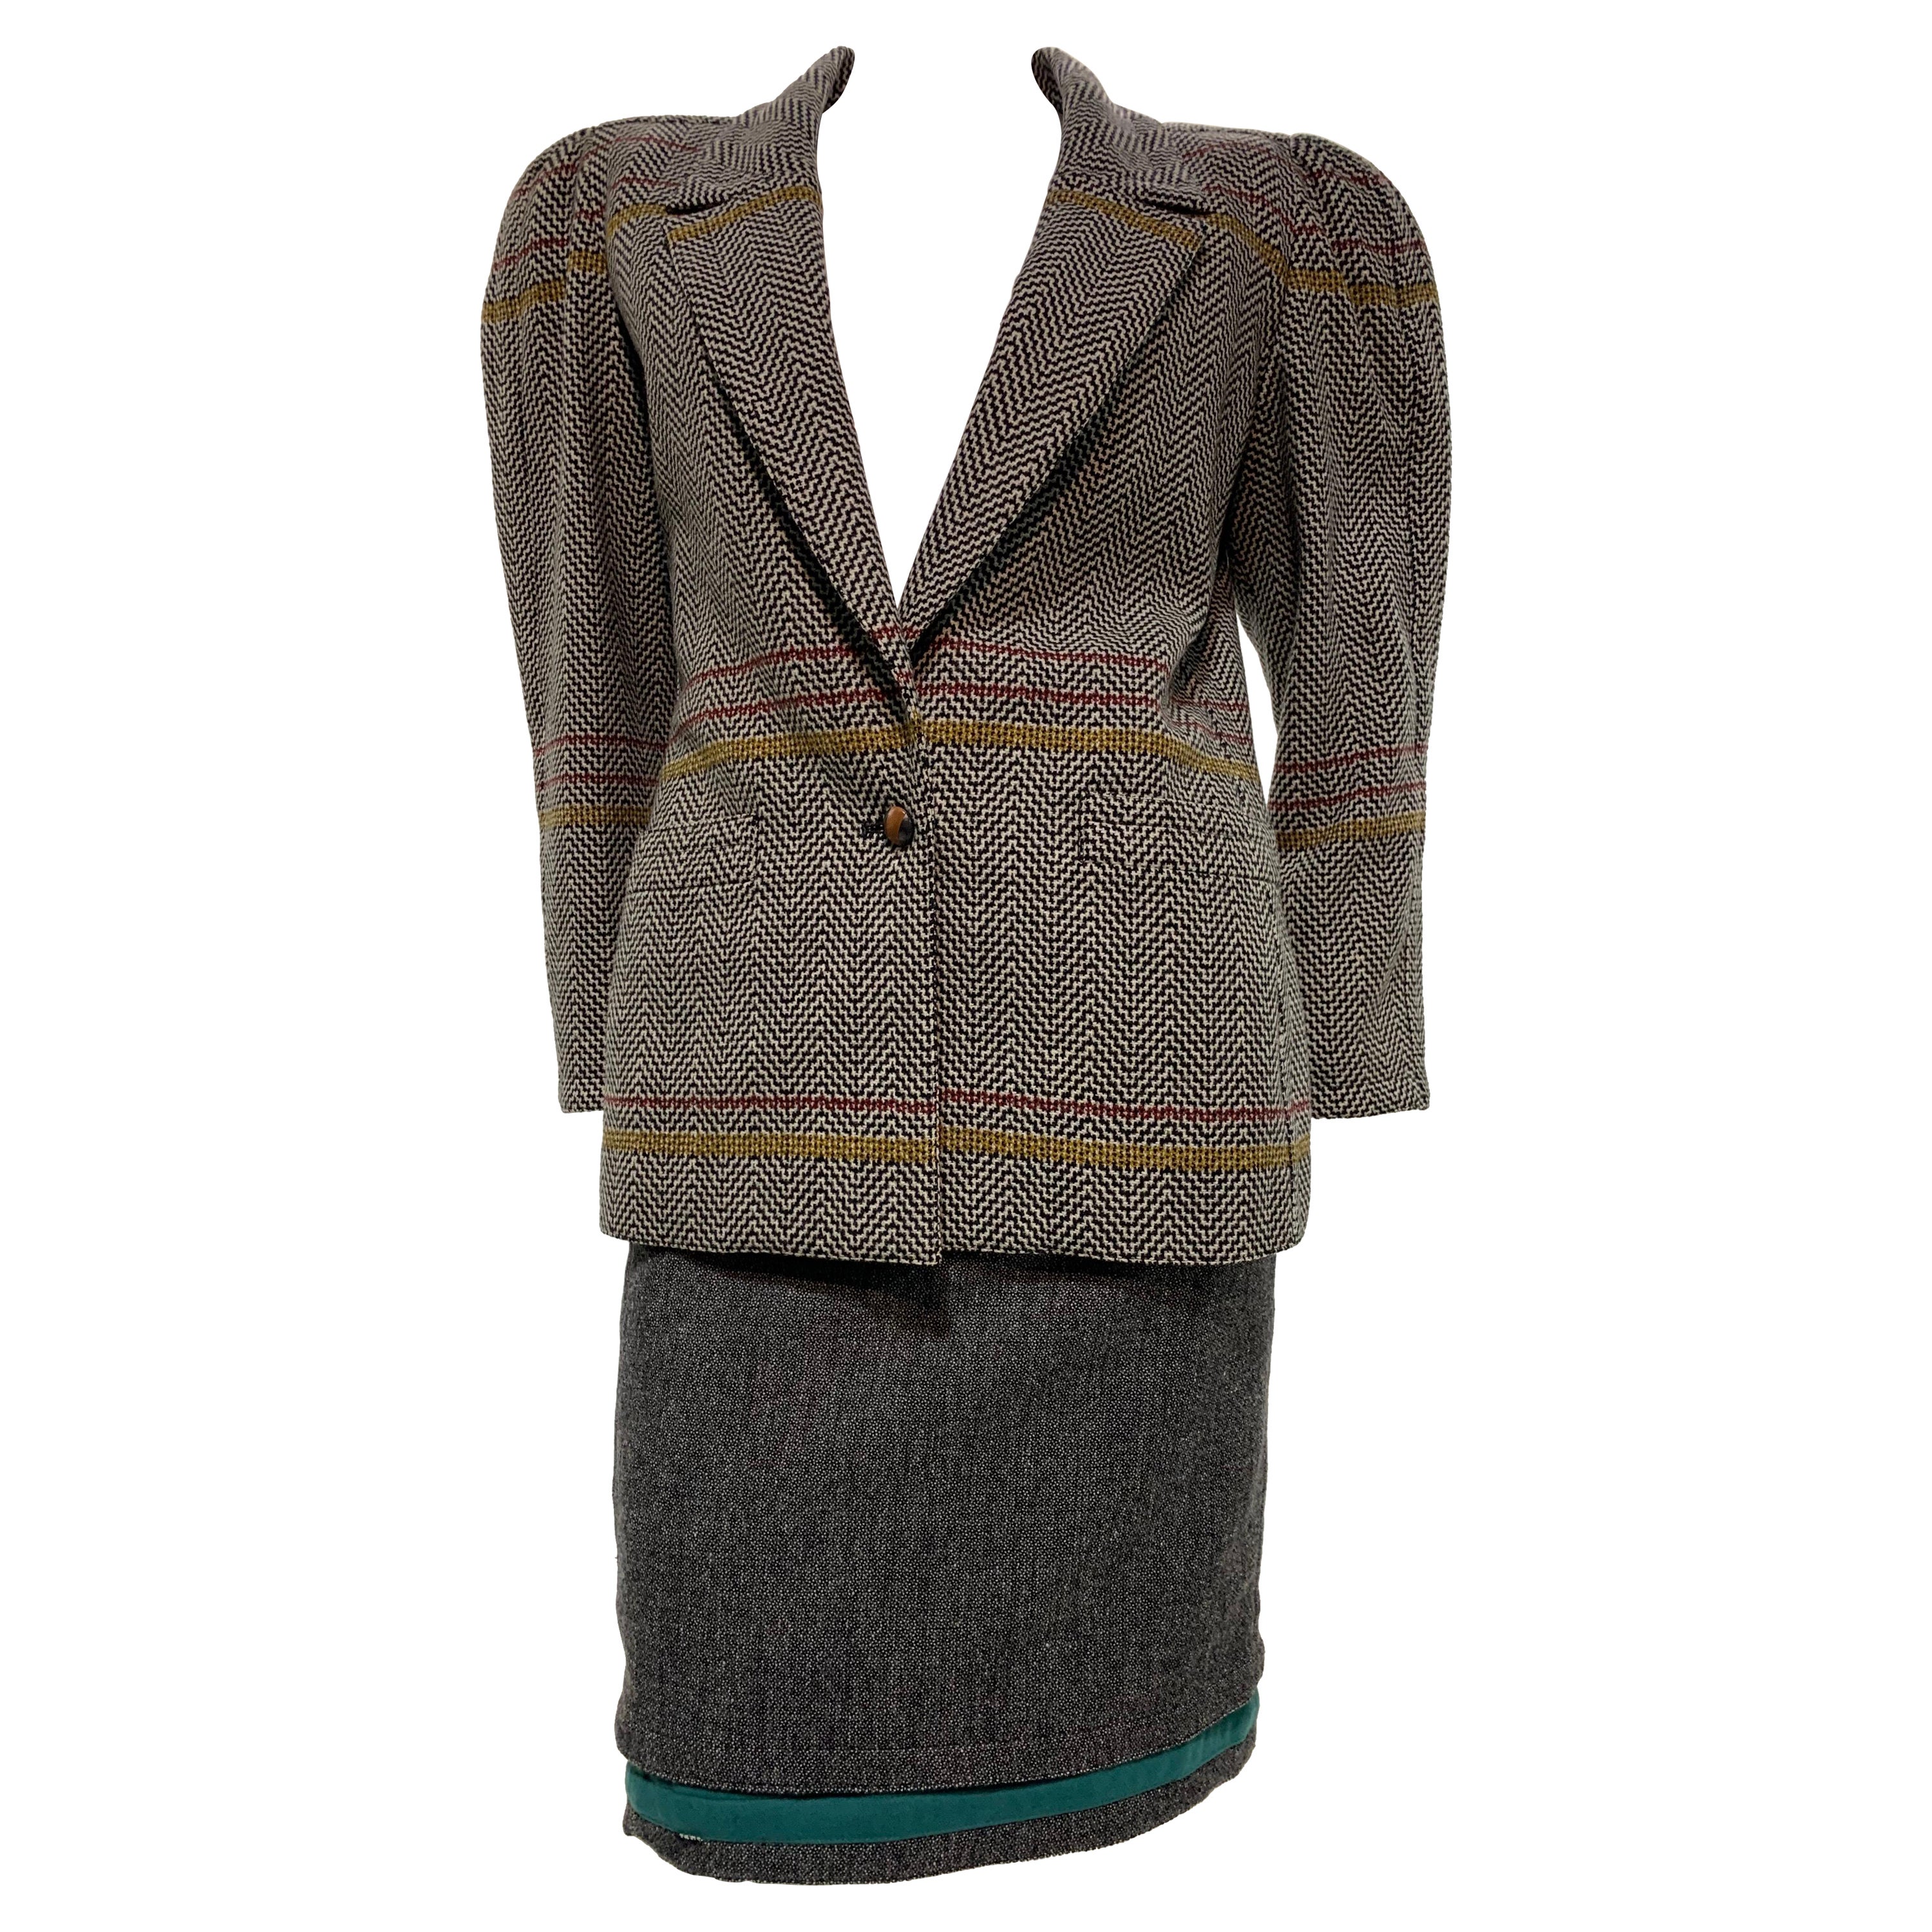 1980 Gianni Versace Mixed Tweed Skirt Suit w/ Structured Shoulder Silhouette For Sale